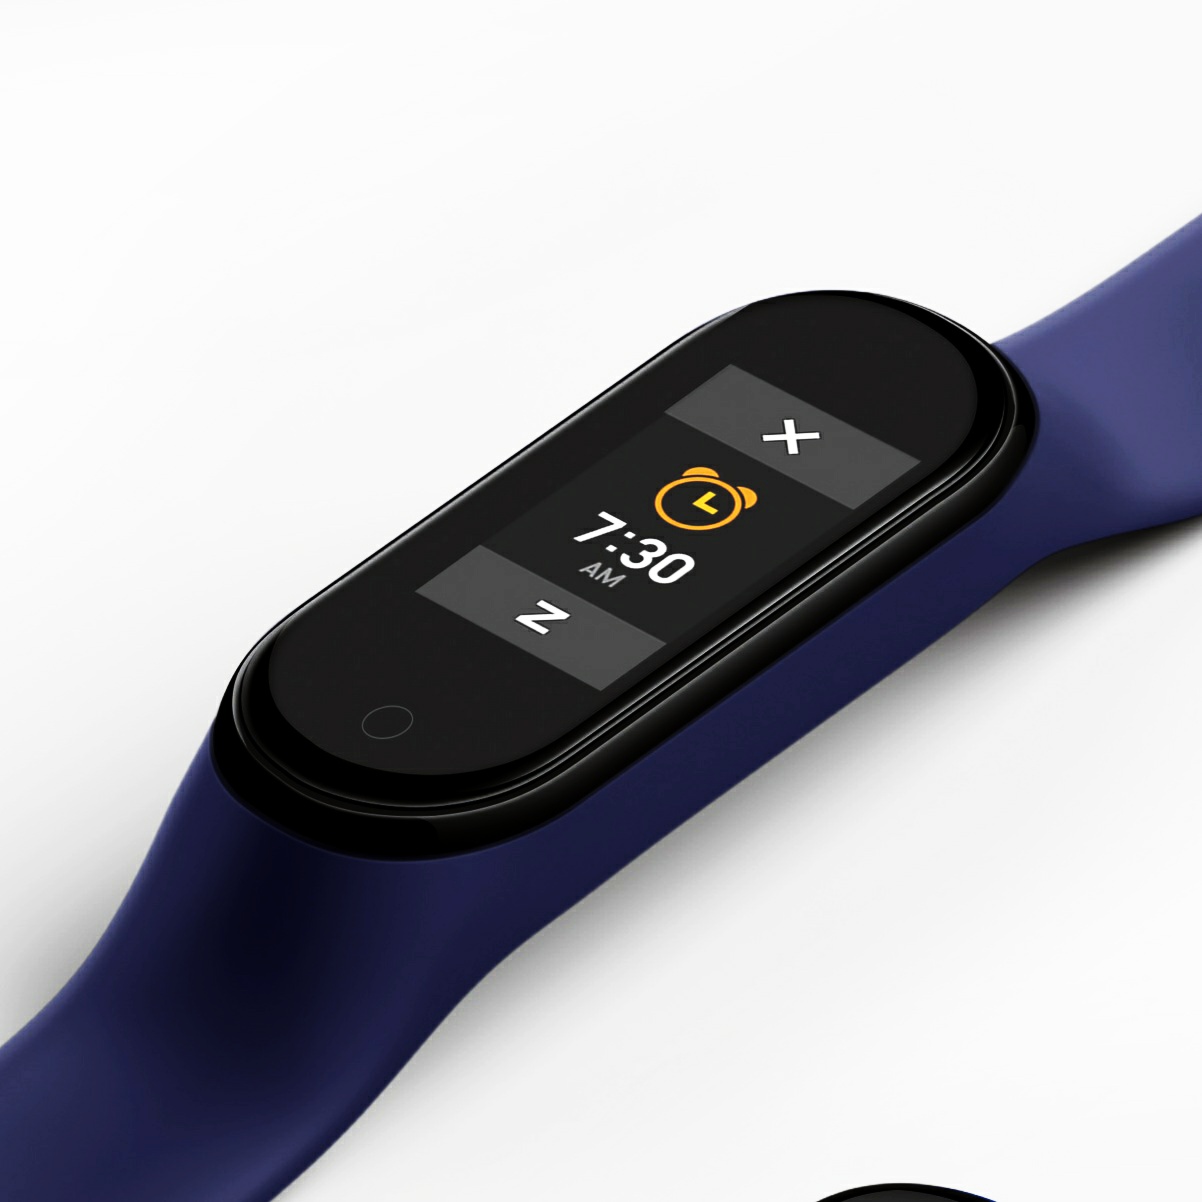 Xiaomi Mi Band 4 - Price, Full Specifications And Release ...